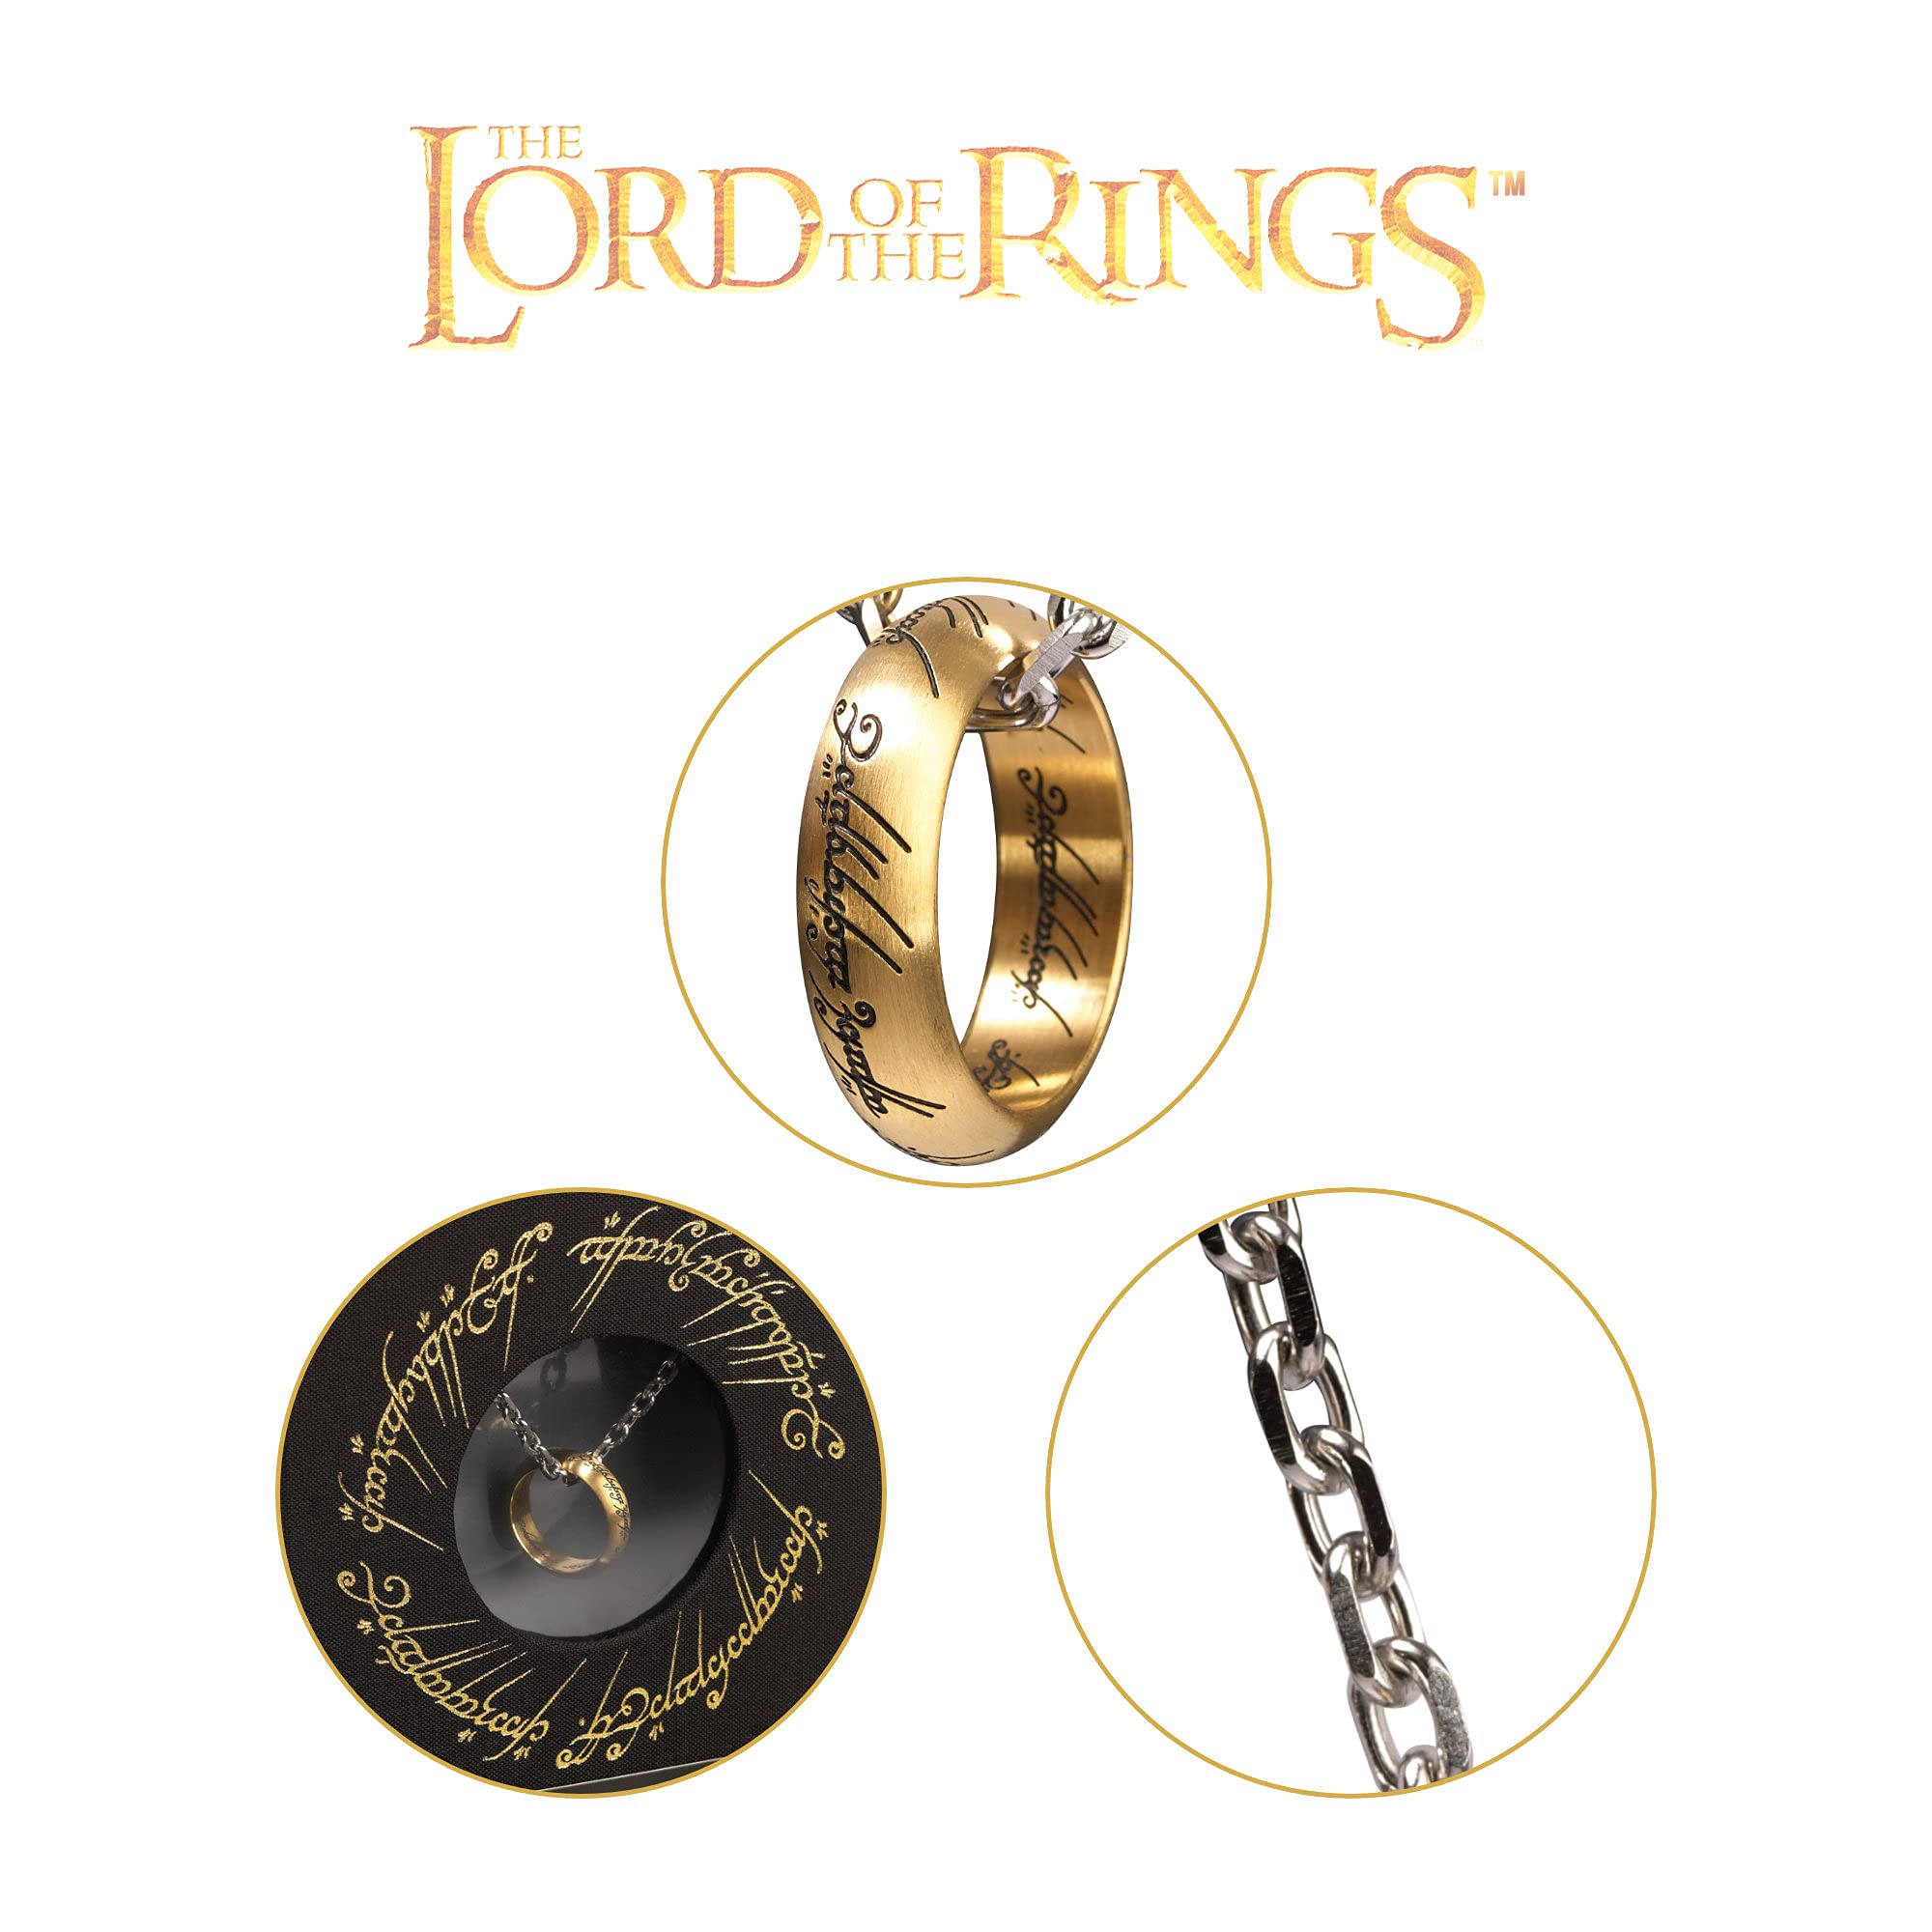 The Noble Collection The Lord of The Rings The One Ring - Anodised Stainless Steel One Ring on 24in (61cm) Chain - Officially Licensed Film Set Movie Props Jewellery Gifts